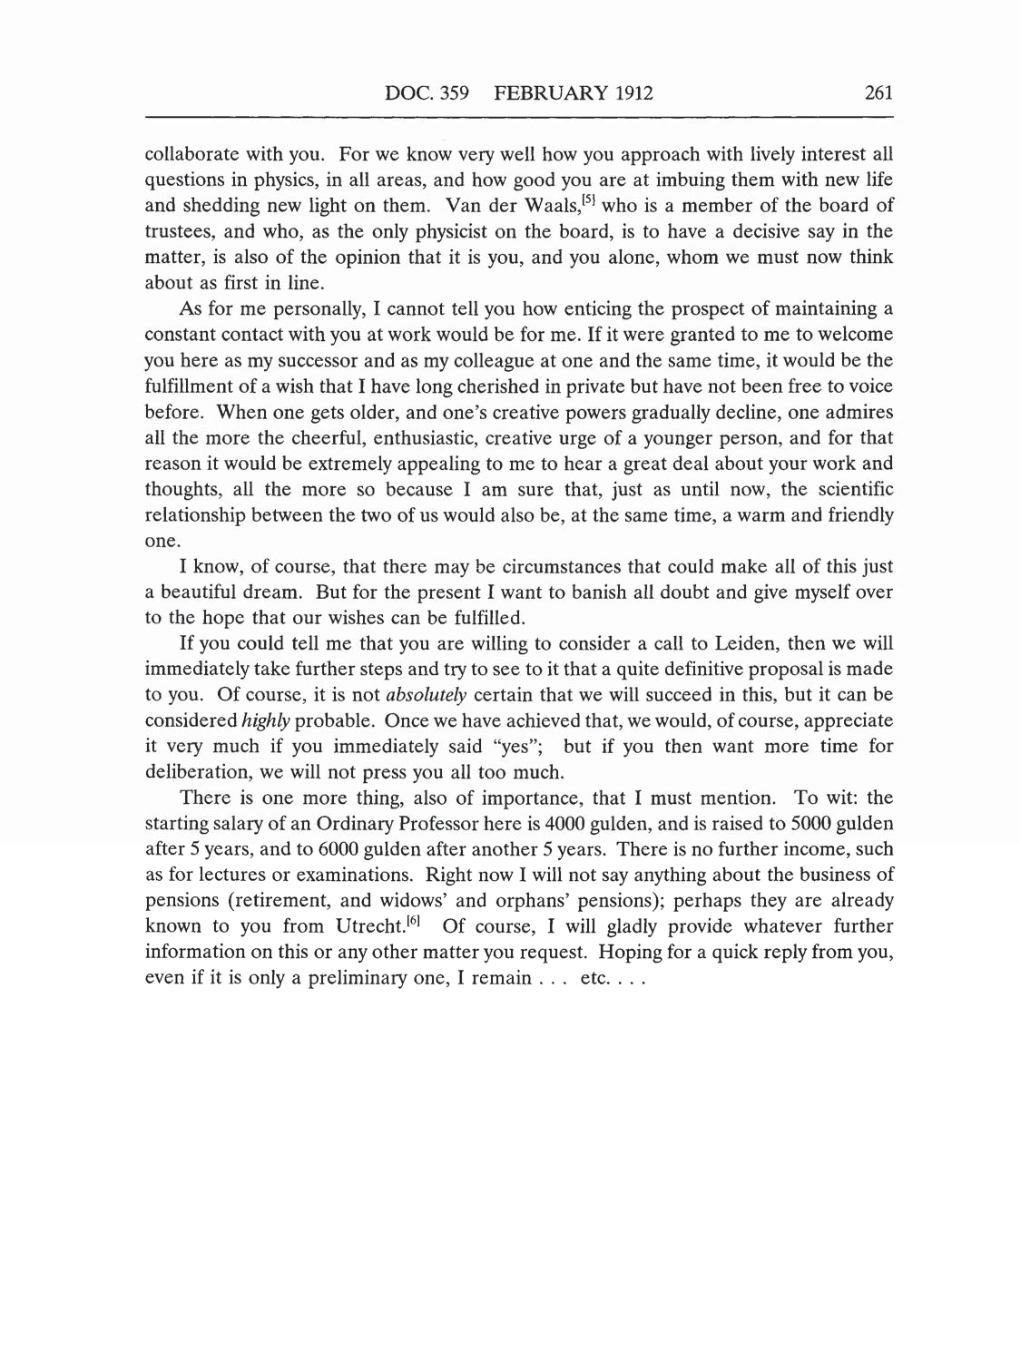 Volume 5: The Swiss Years: Correspondence, 1902-1914 (English translation supplement) page 261